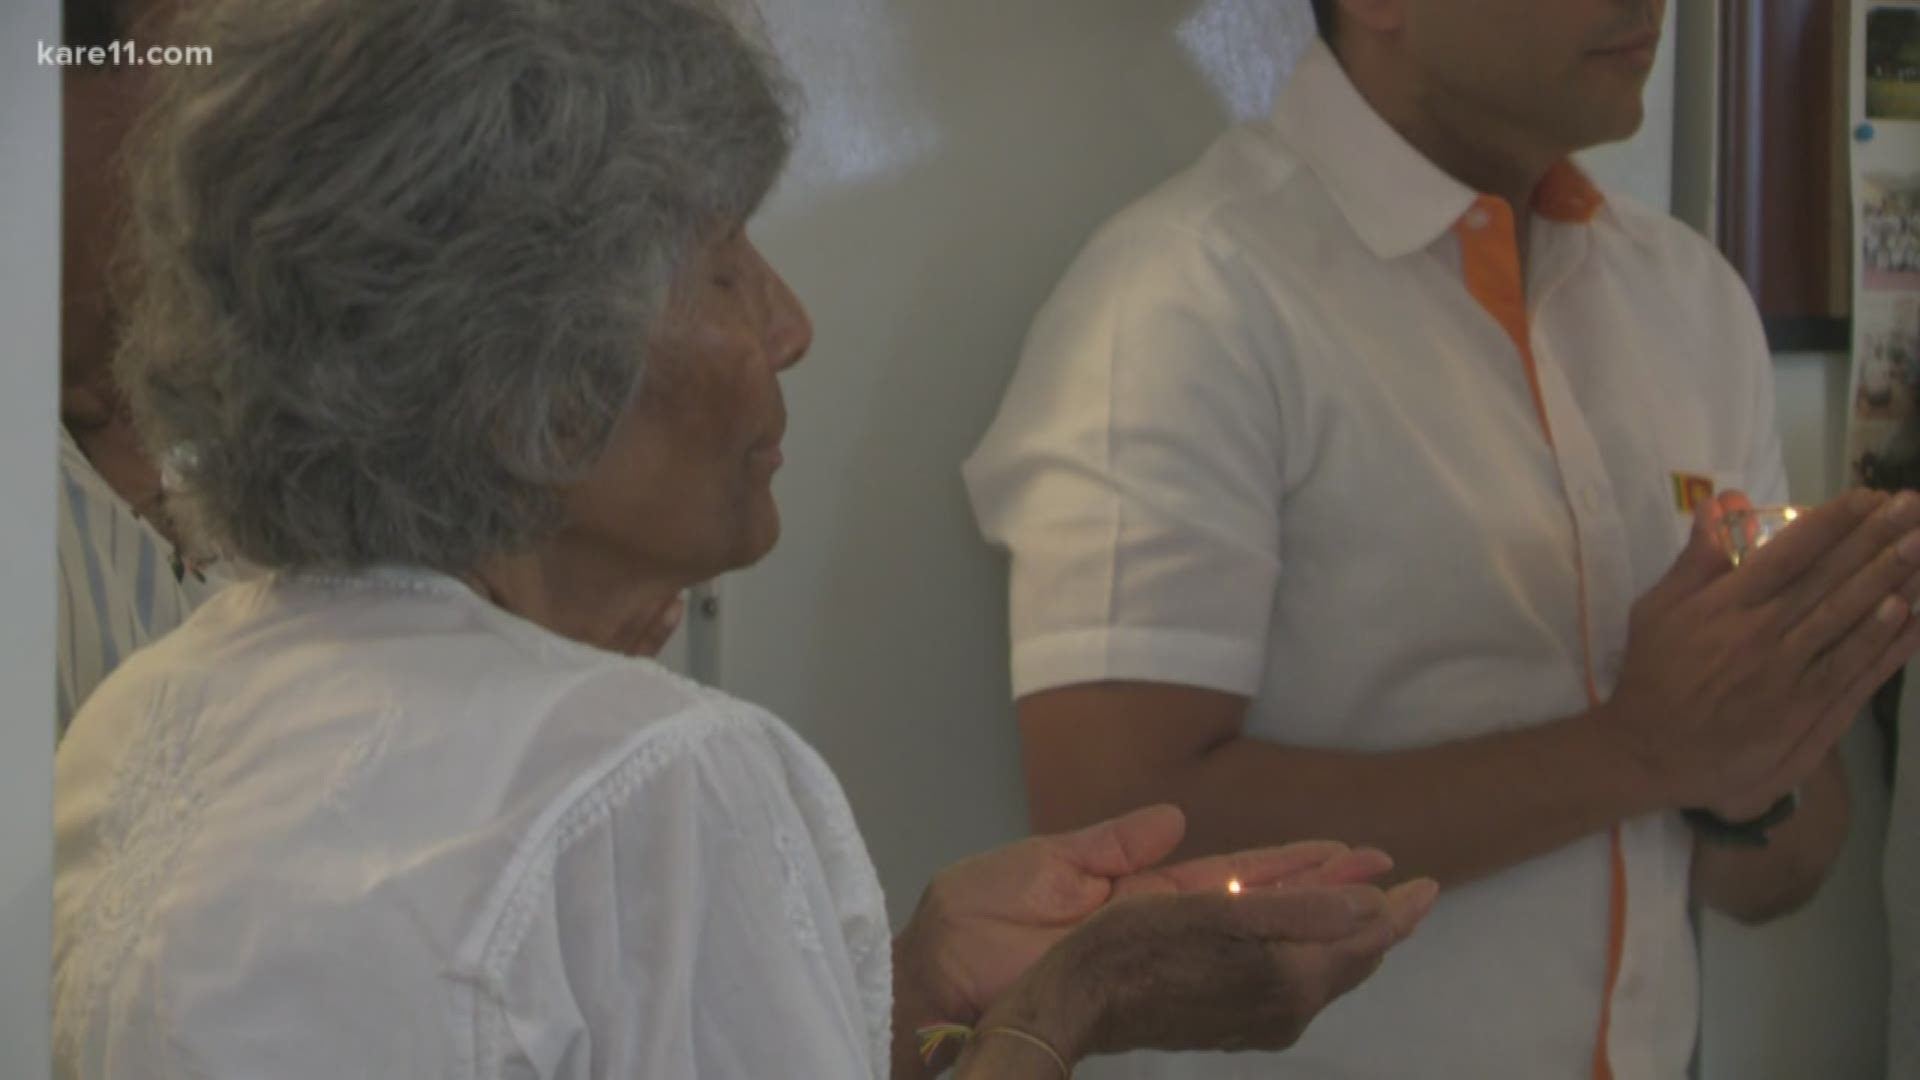 At a Minneapolis Buddhist temple, Minnesota Buddhist Vihara, KARE 11's Heidi Wigdahl spoke to people who are originally from Sri Lanka - and still have loved ones there.